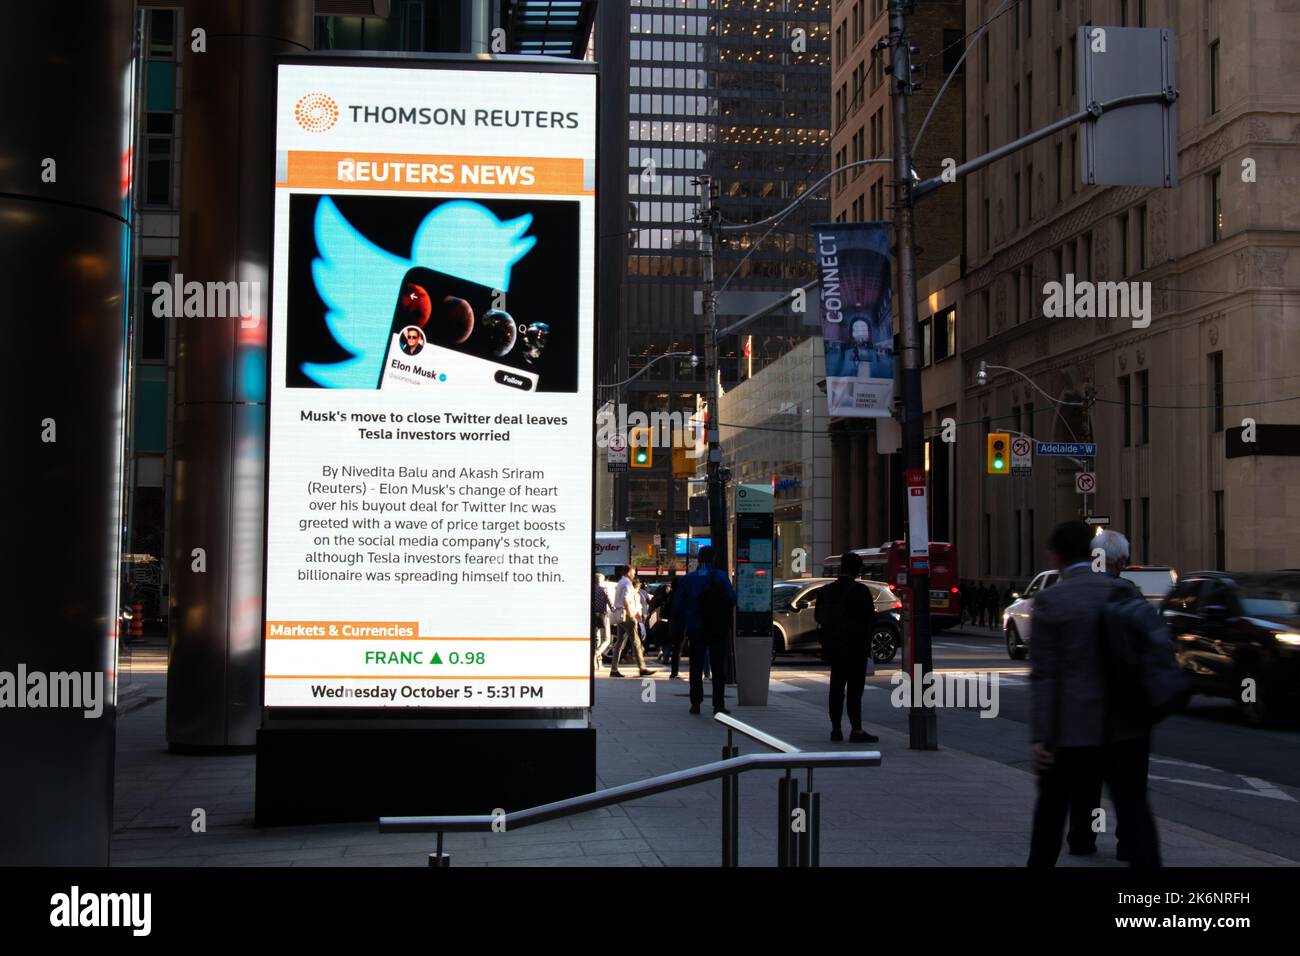 A Thomas Reuters news headline is seen in Toronto's Financial District; about Elon Musk's plans to proceed with the purchase of Twitter, Inc. (TWTR). Stock Photo